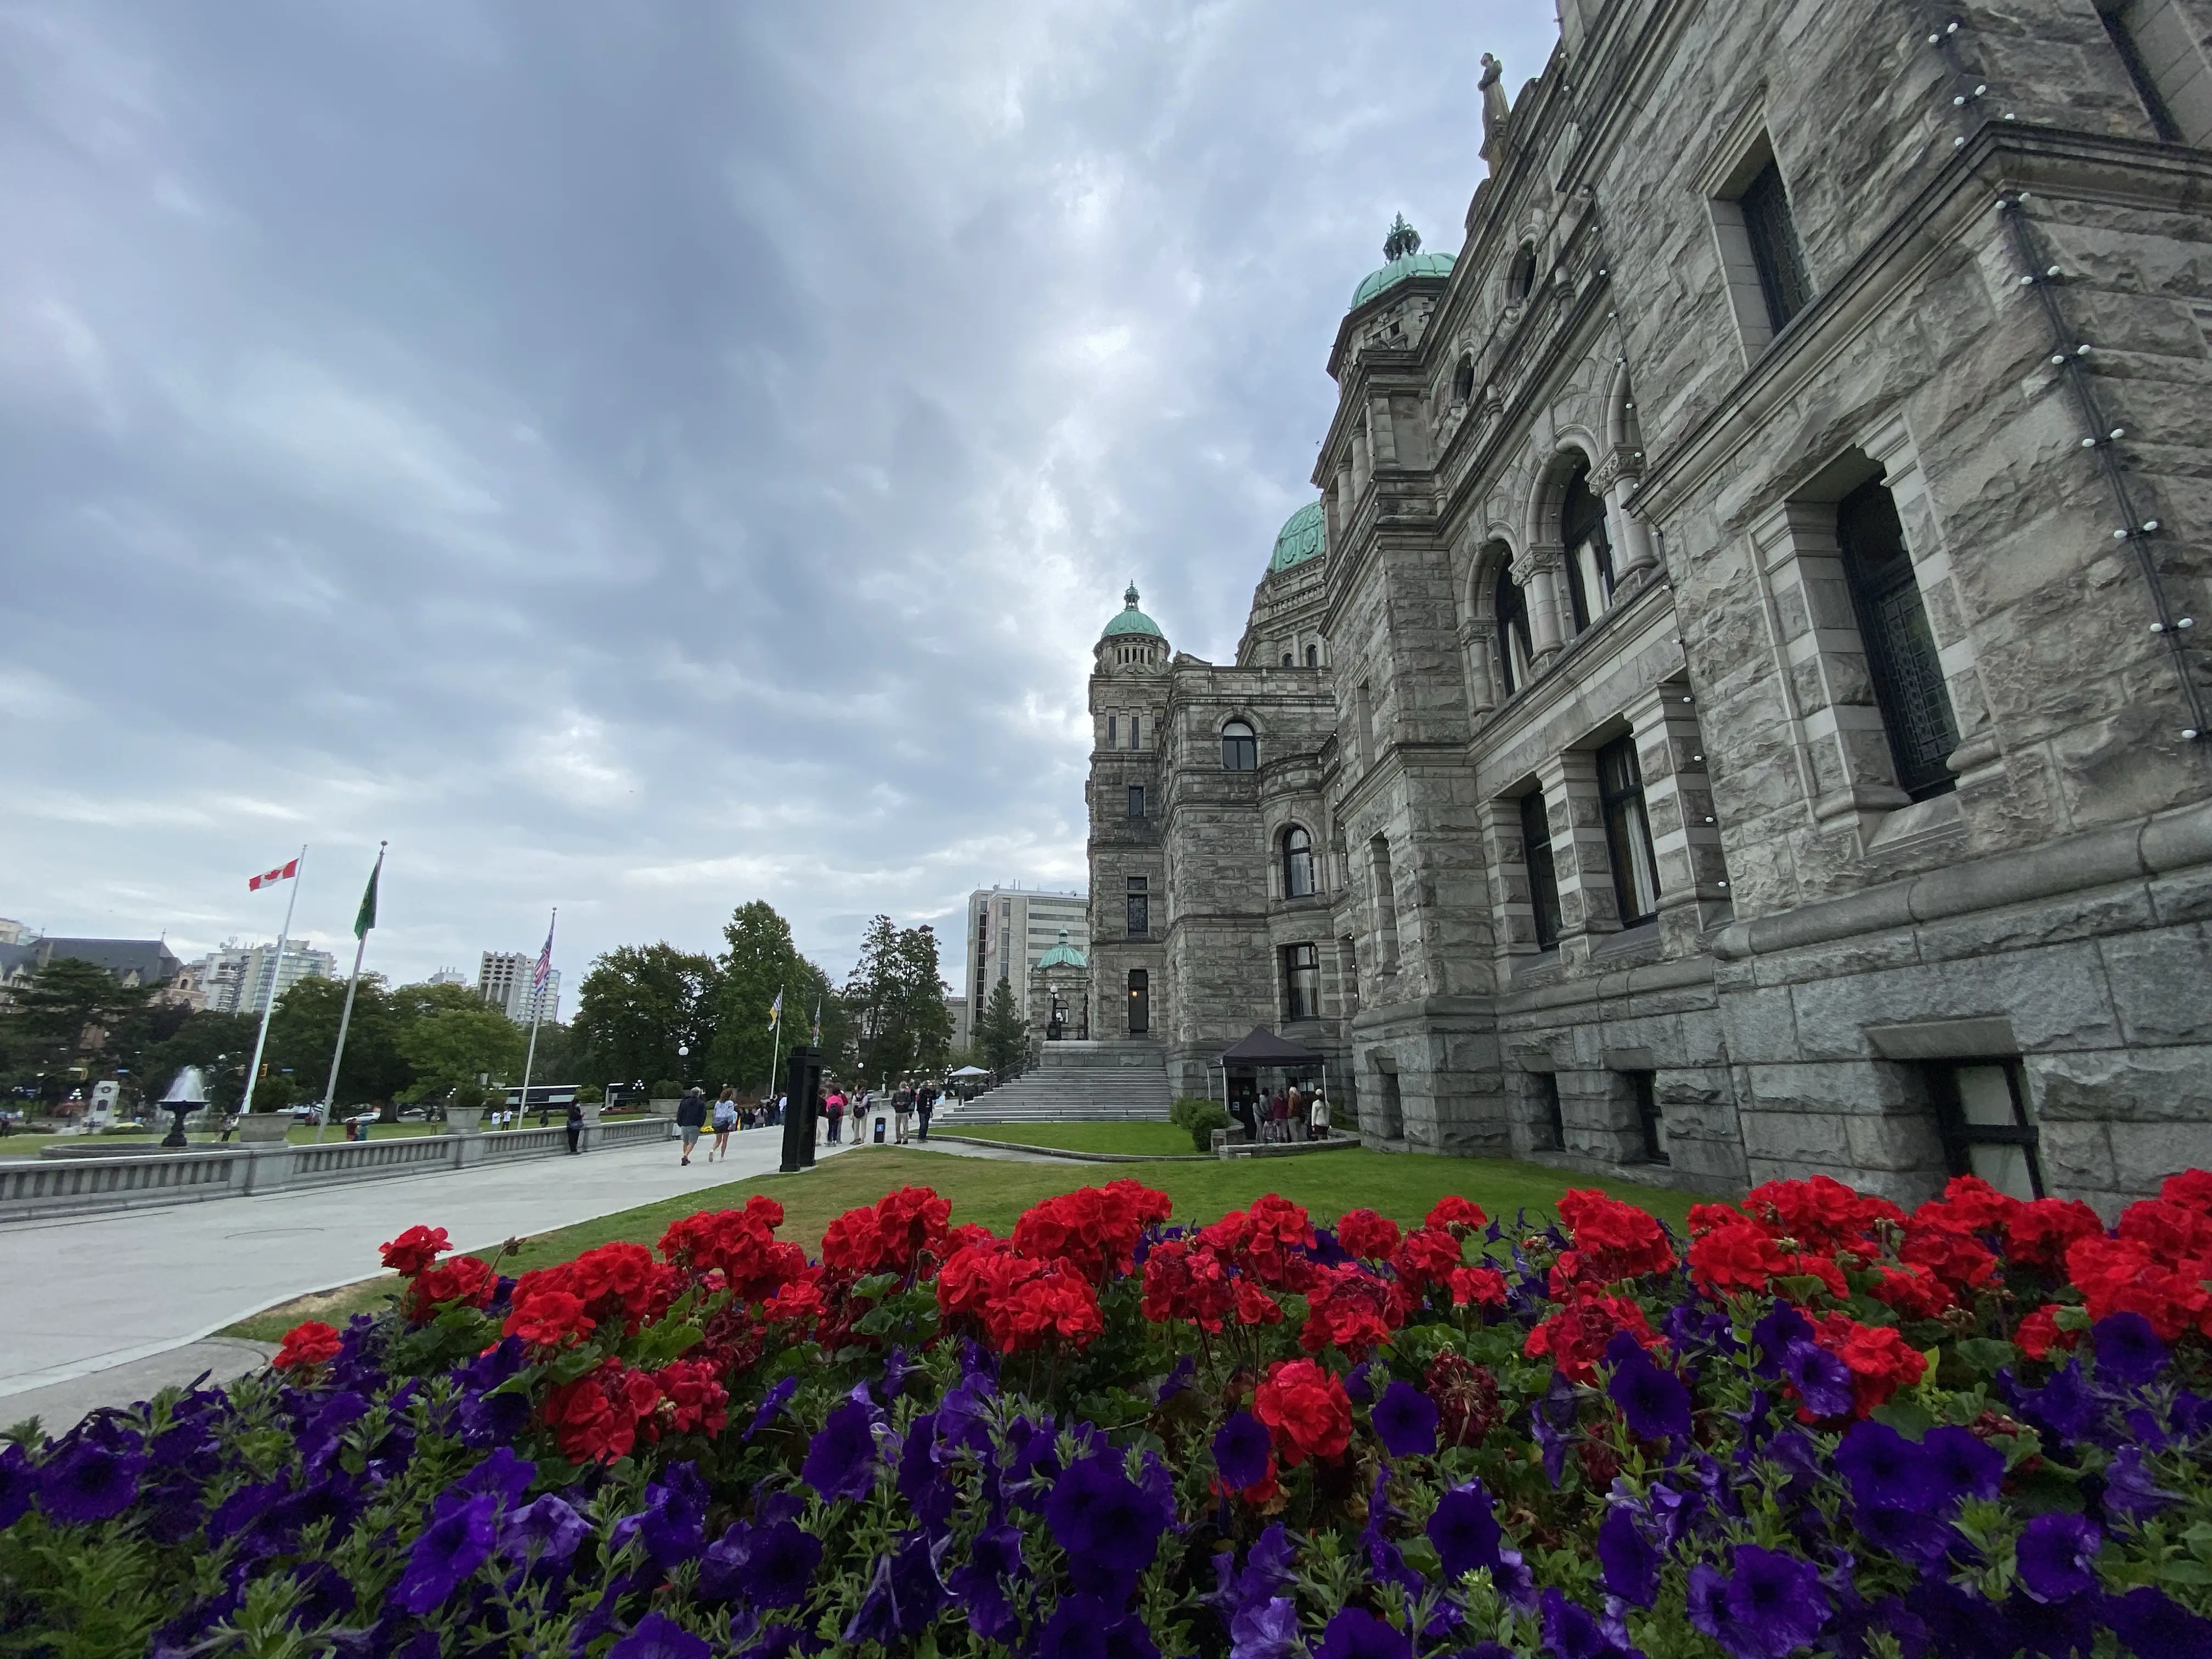 Some of the flowers at the BC Parliament Building in Victoria